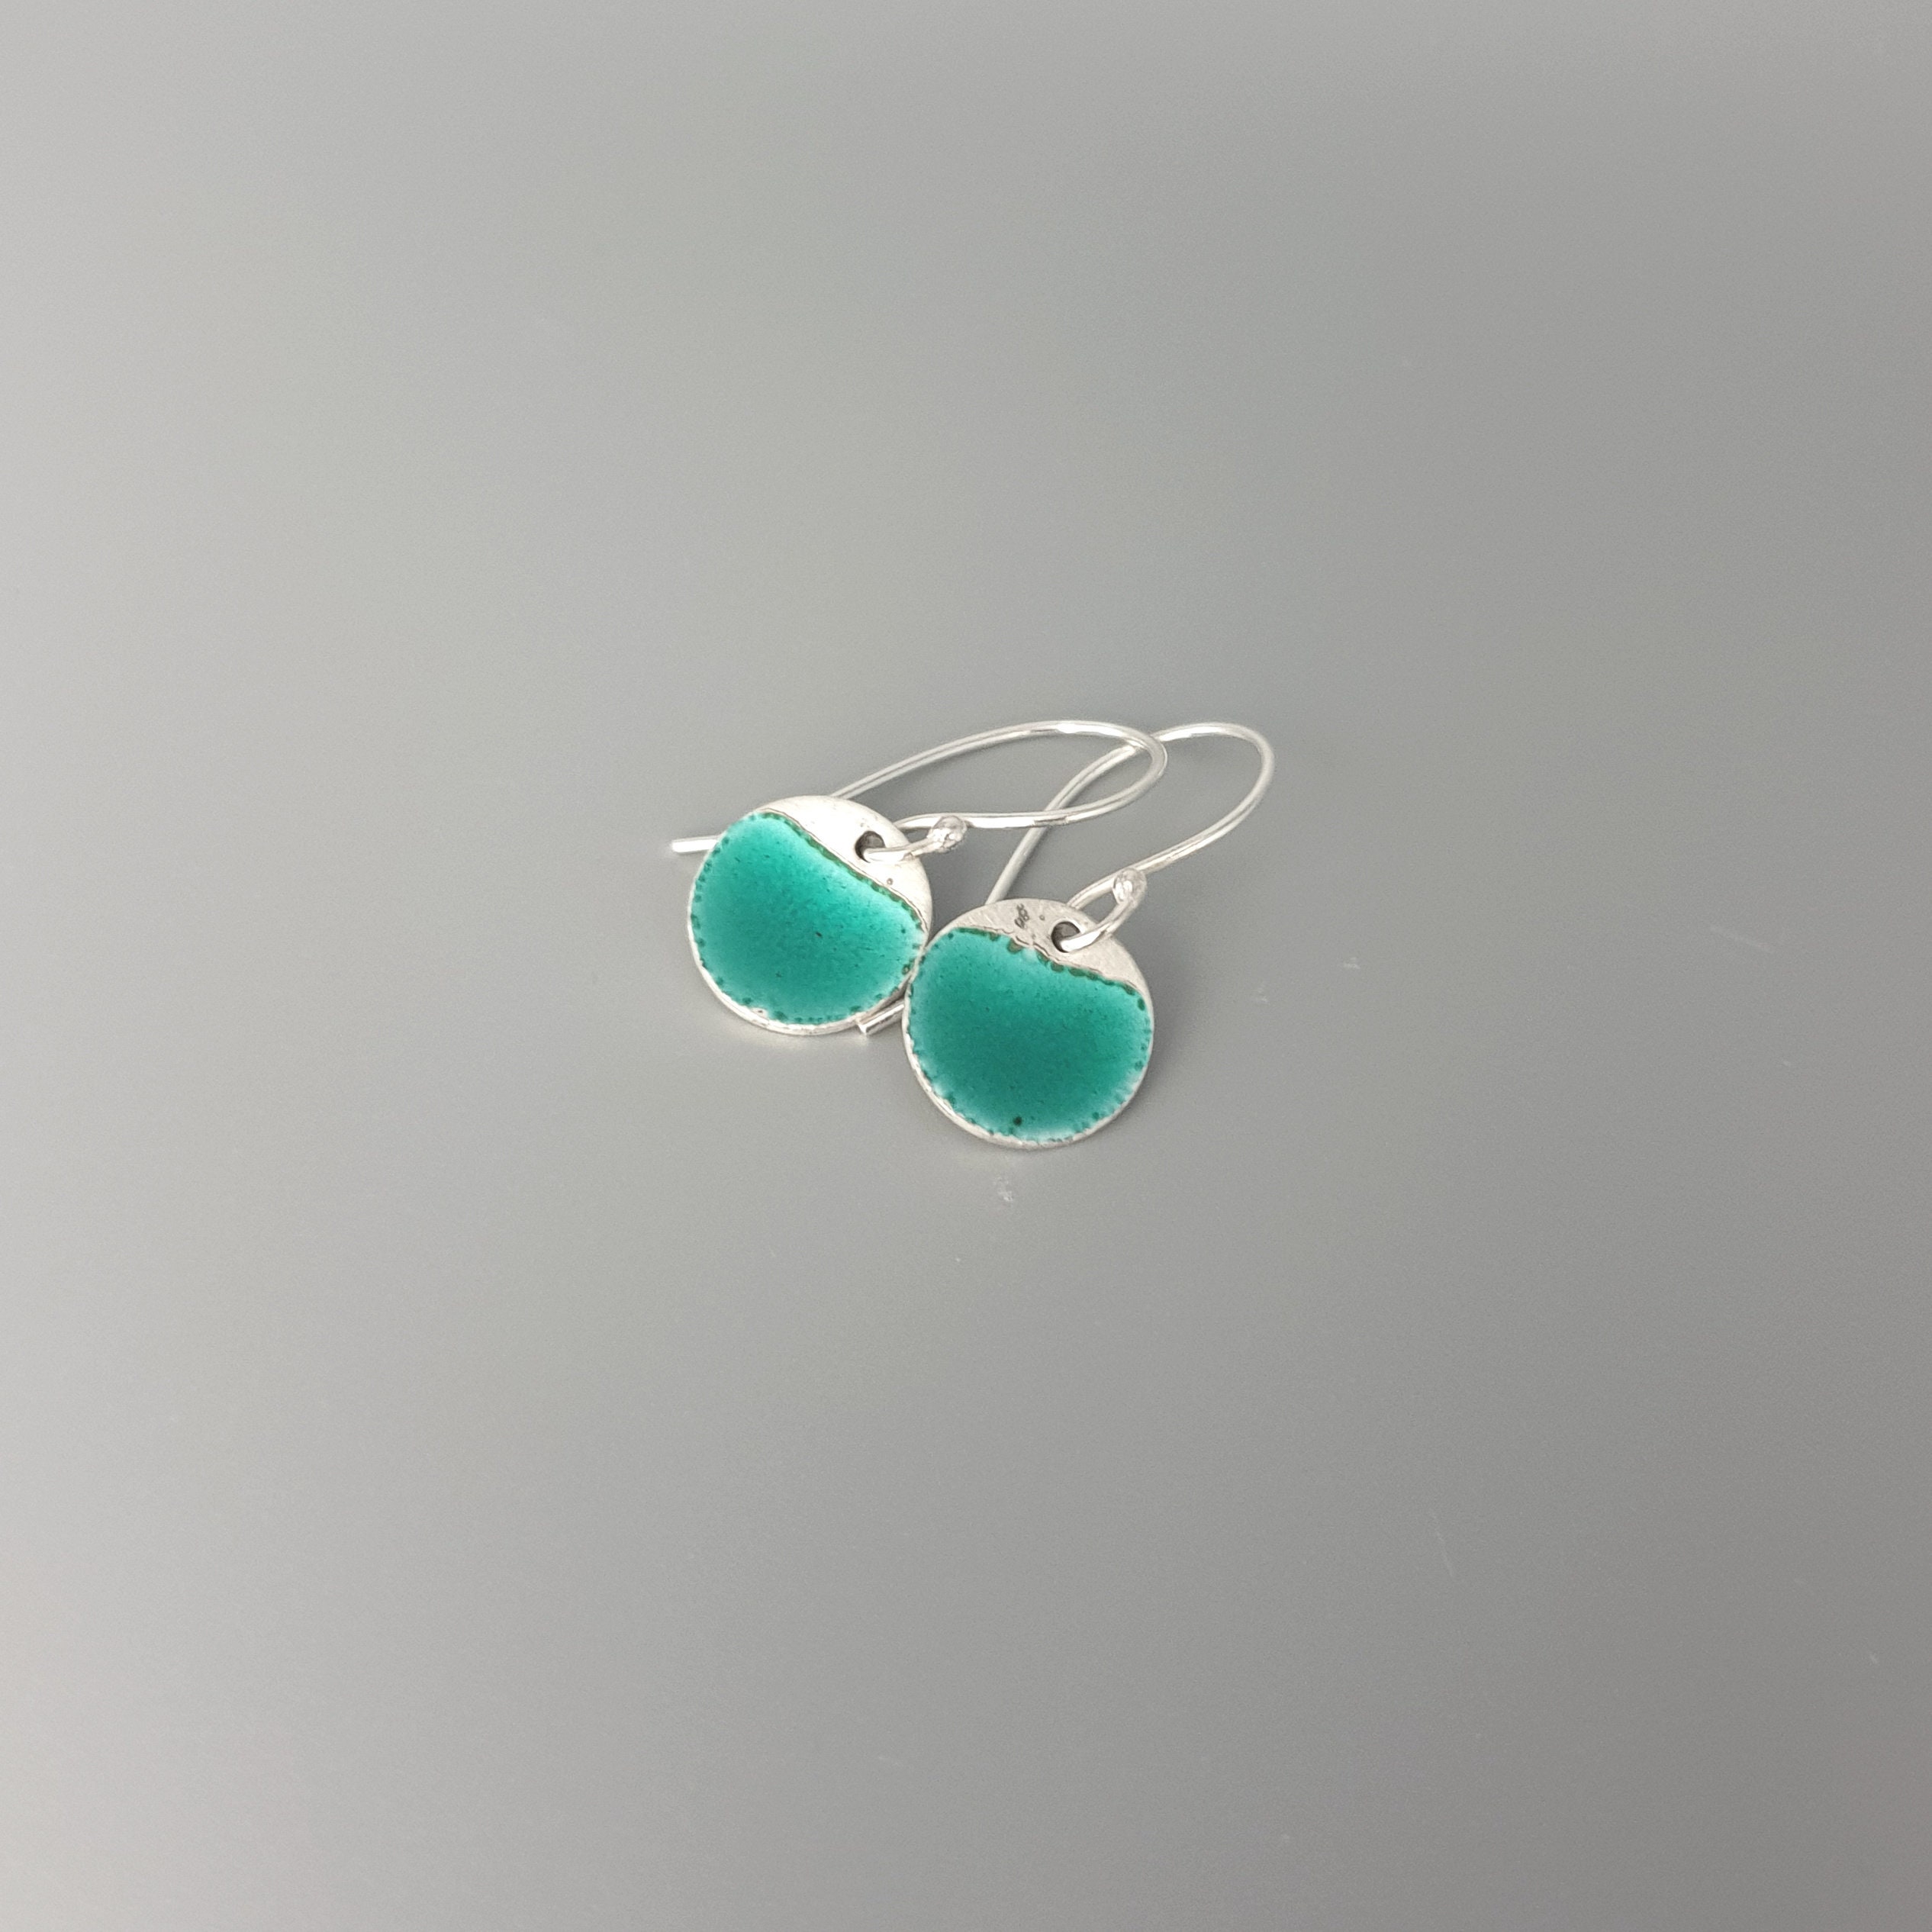 Obscuro Jewelry Sterling Silver Sheet with Turquoise Disc Earrings